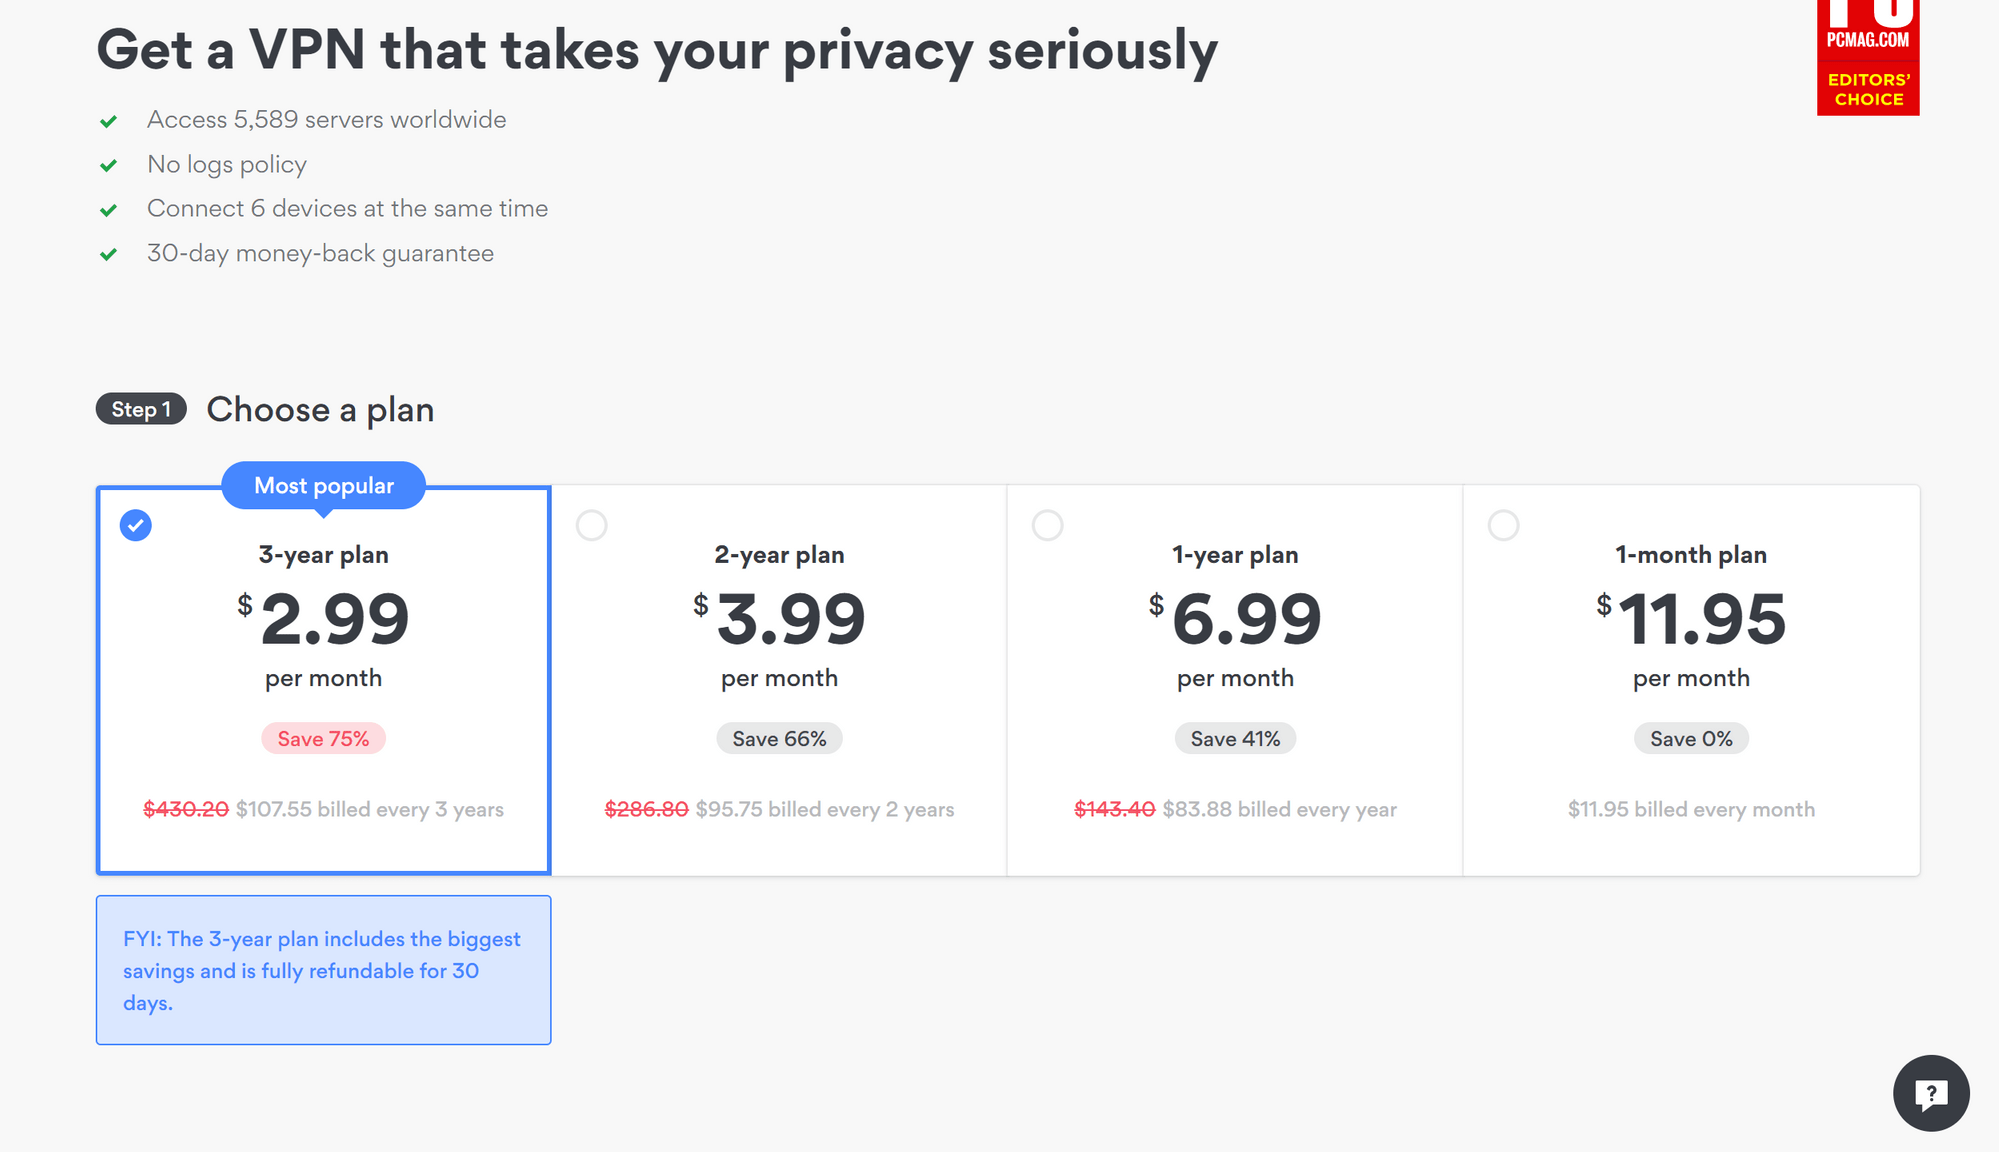 How much does a VPN like NordVPN cost